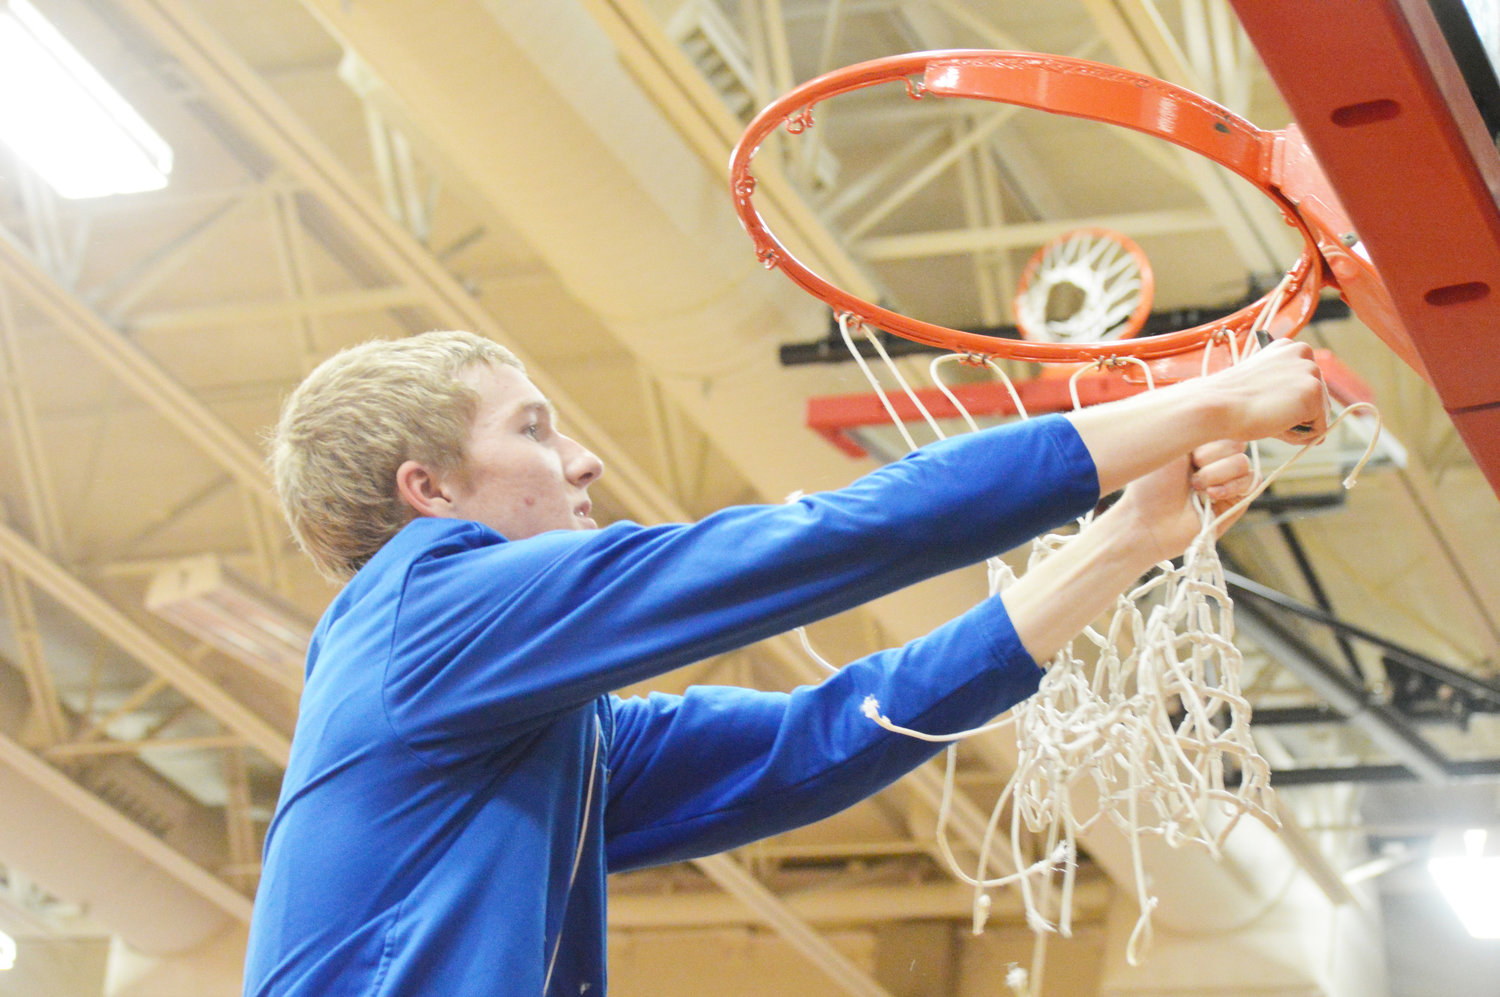 Yantis senior Lucas Cerretani got the honor of cutting down the net after the Owls defeated Bellevue 50-45 for the area championship.